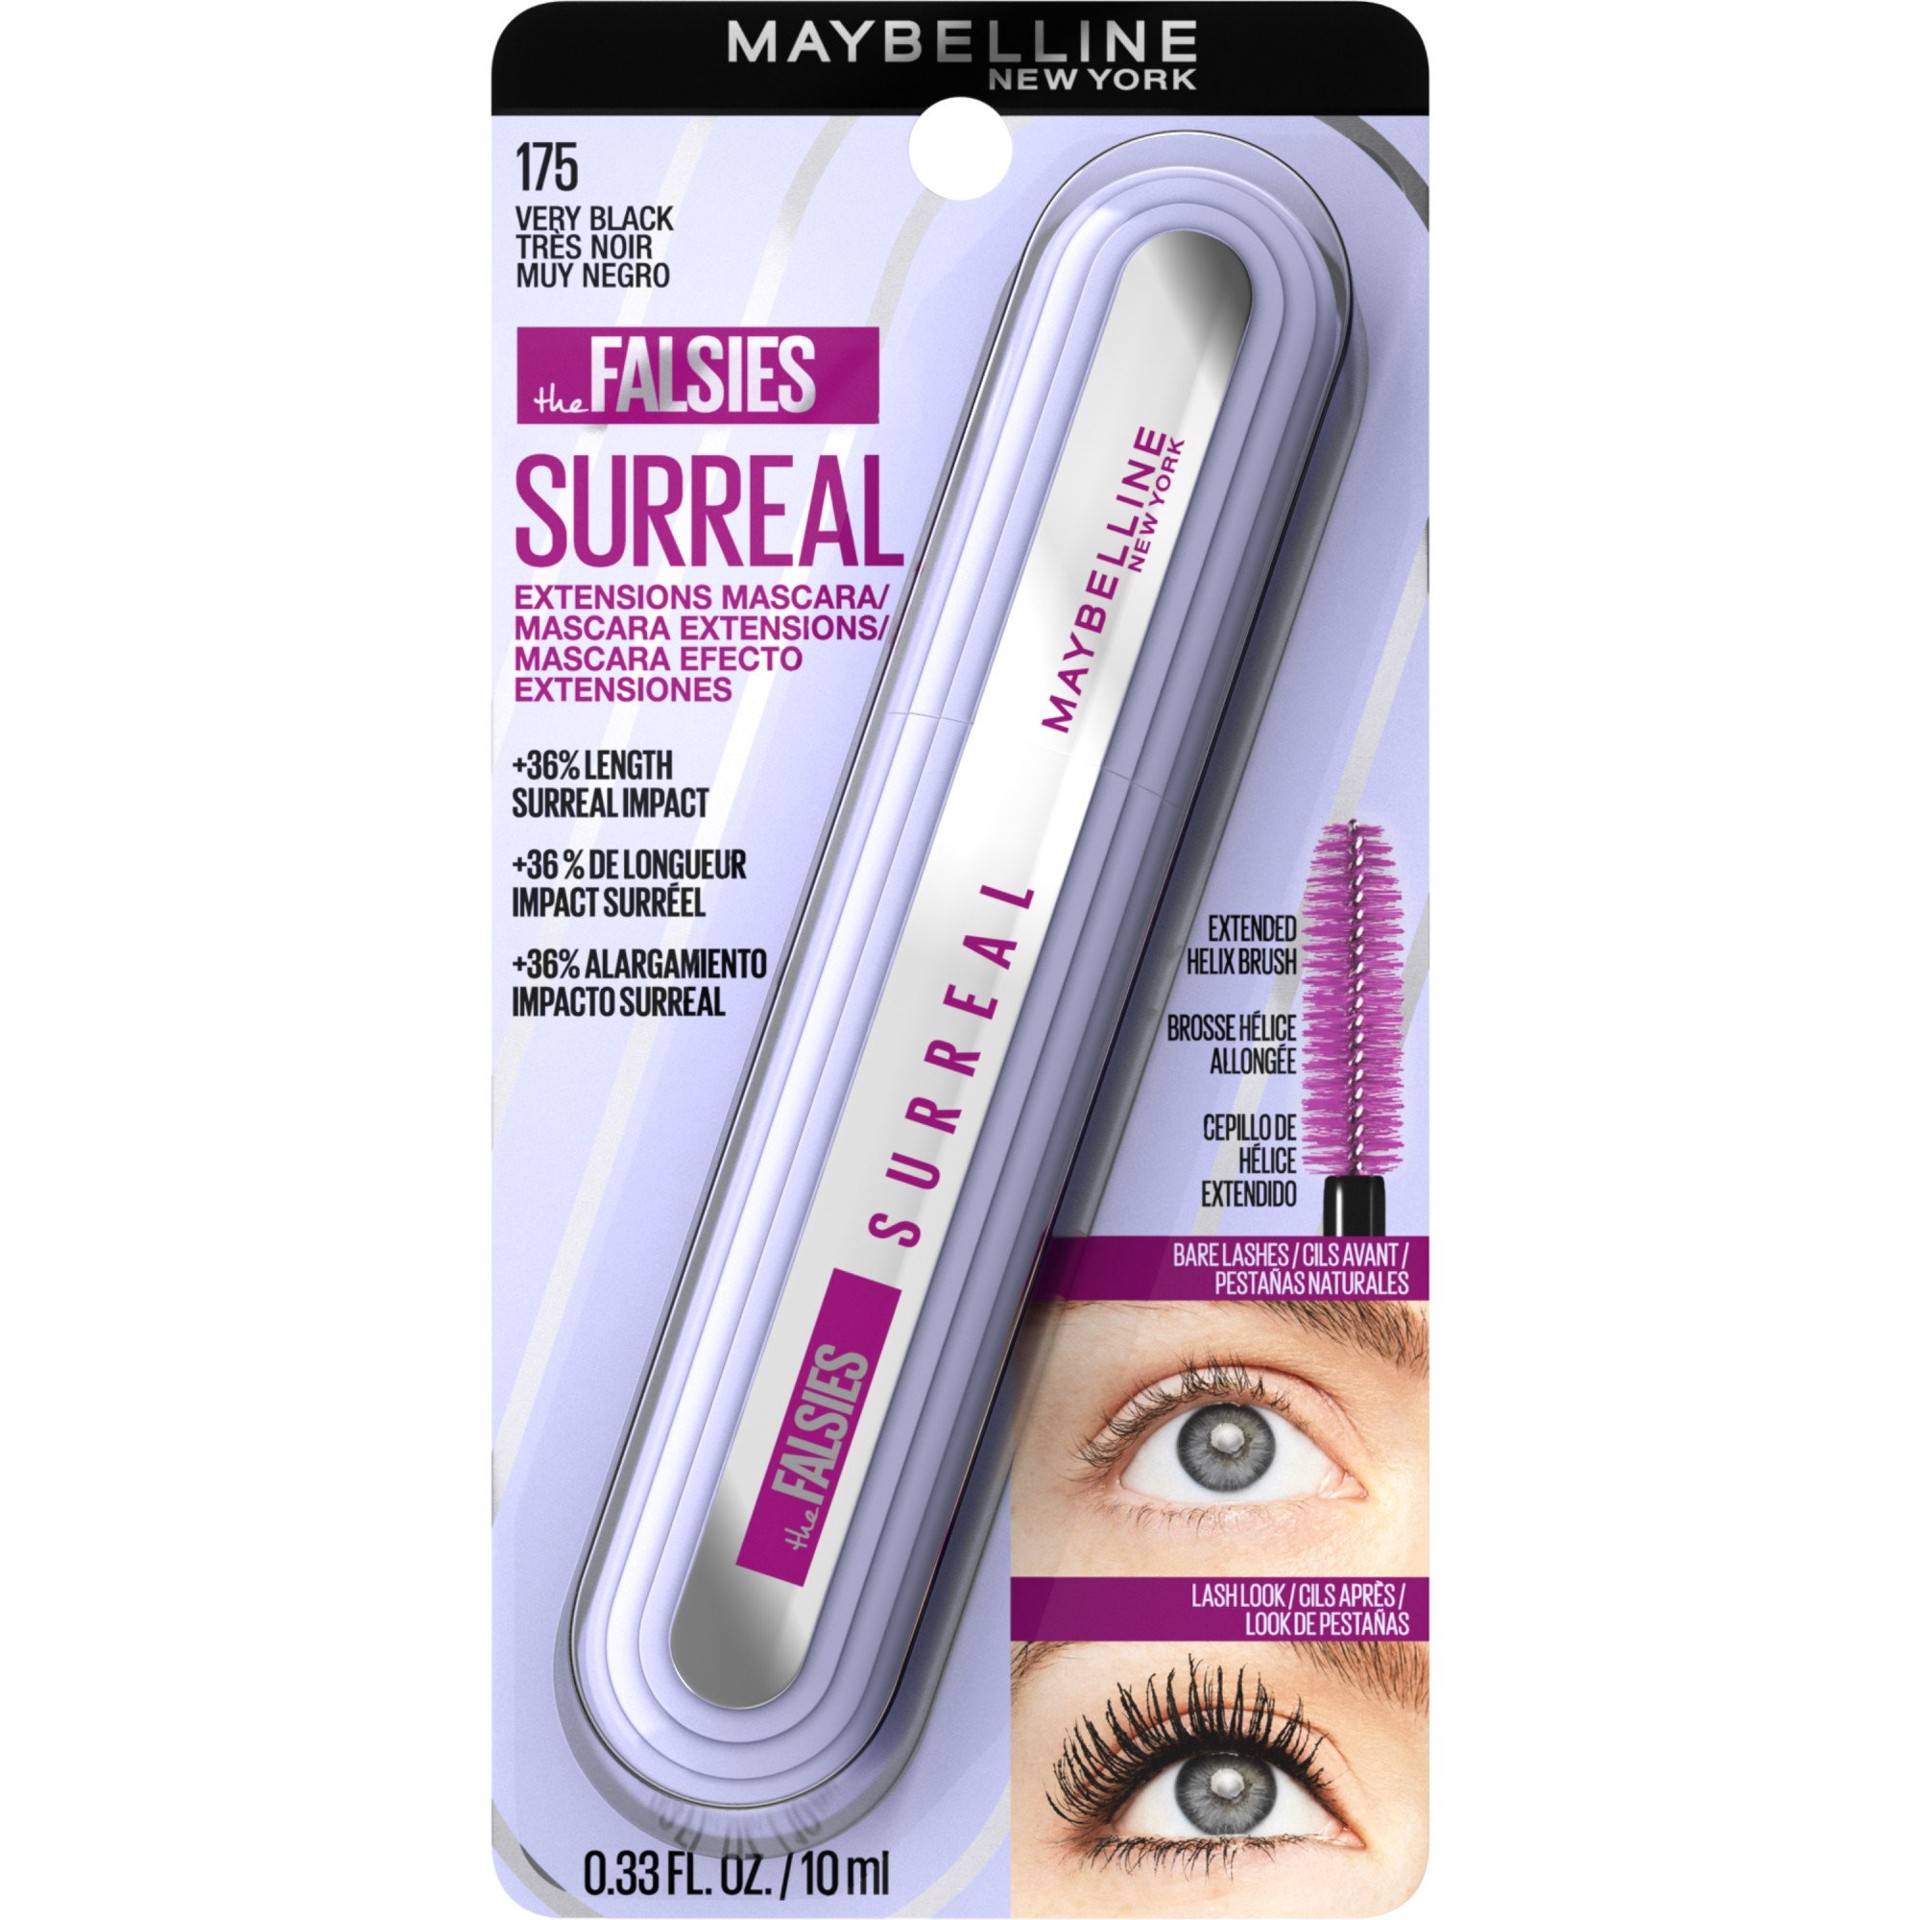 Maybelline The Falsies Surreal Mascara - Very Black 1 ct | Shipt